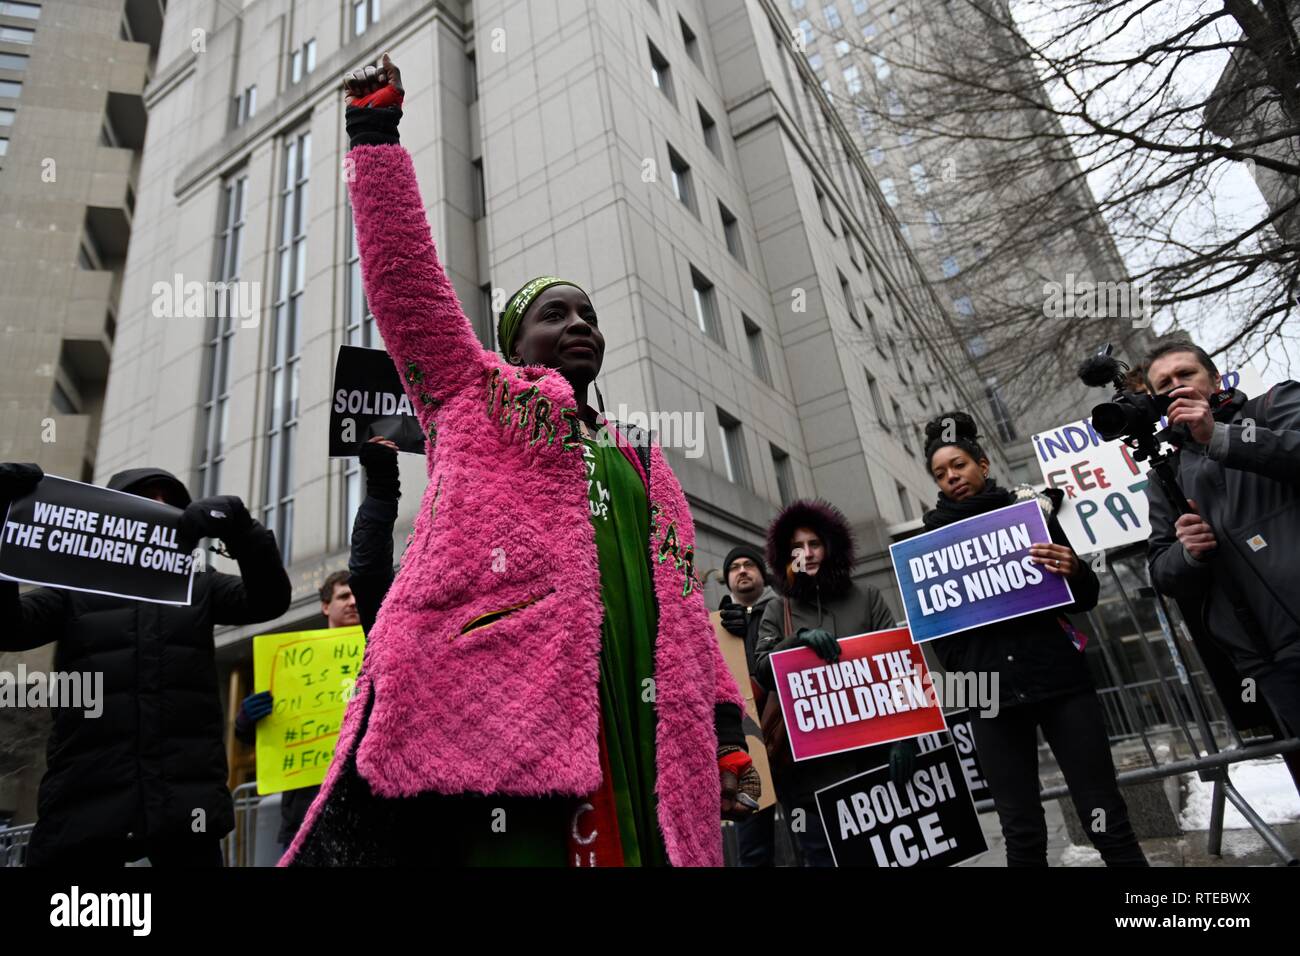 New York, NY, USA. 1 March 2019. US Statue of Liberty climber Patricia Okoumou speaks to supporters outside federal court before a hearing on whether her bail will be revoked after she was arrested for climbing a school for immigrant children in Austin, Texas, in another act of civil disobedience to protest against Trump administration immigration policies.  Okoumou told supporters she would go on a hunger struck if she is jailed. Credit: Joseph Reid/Alamy Live News Stock Photo